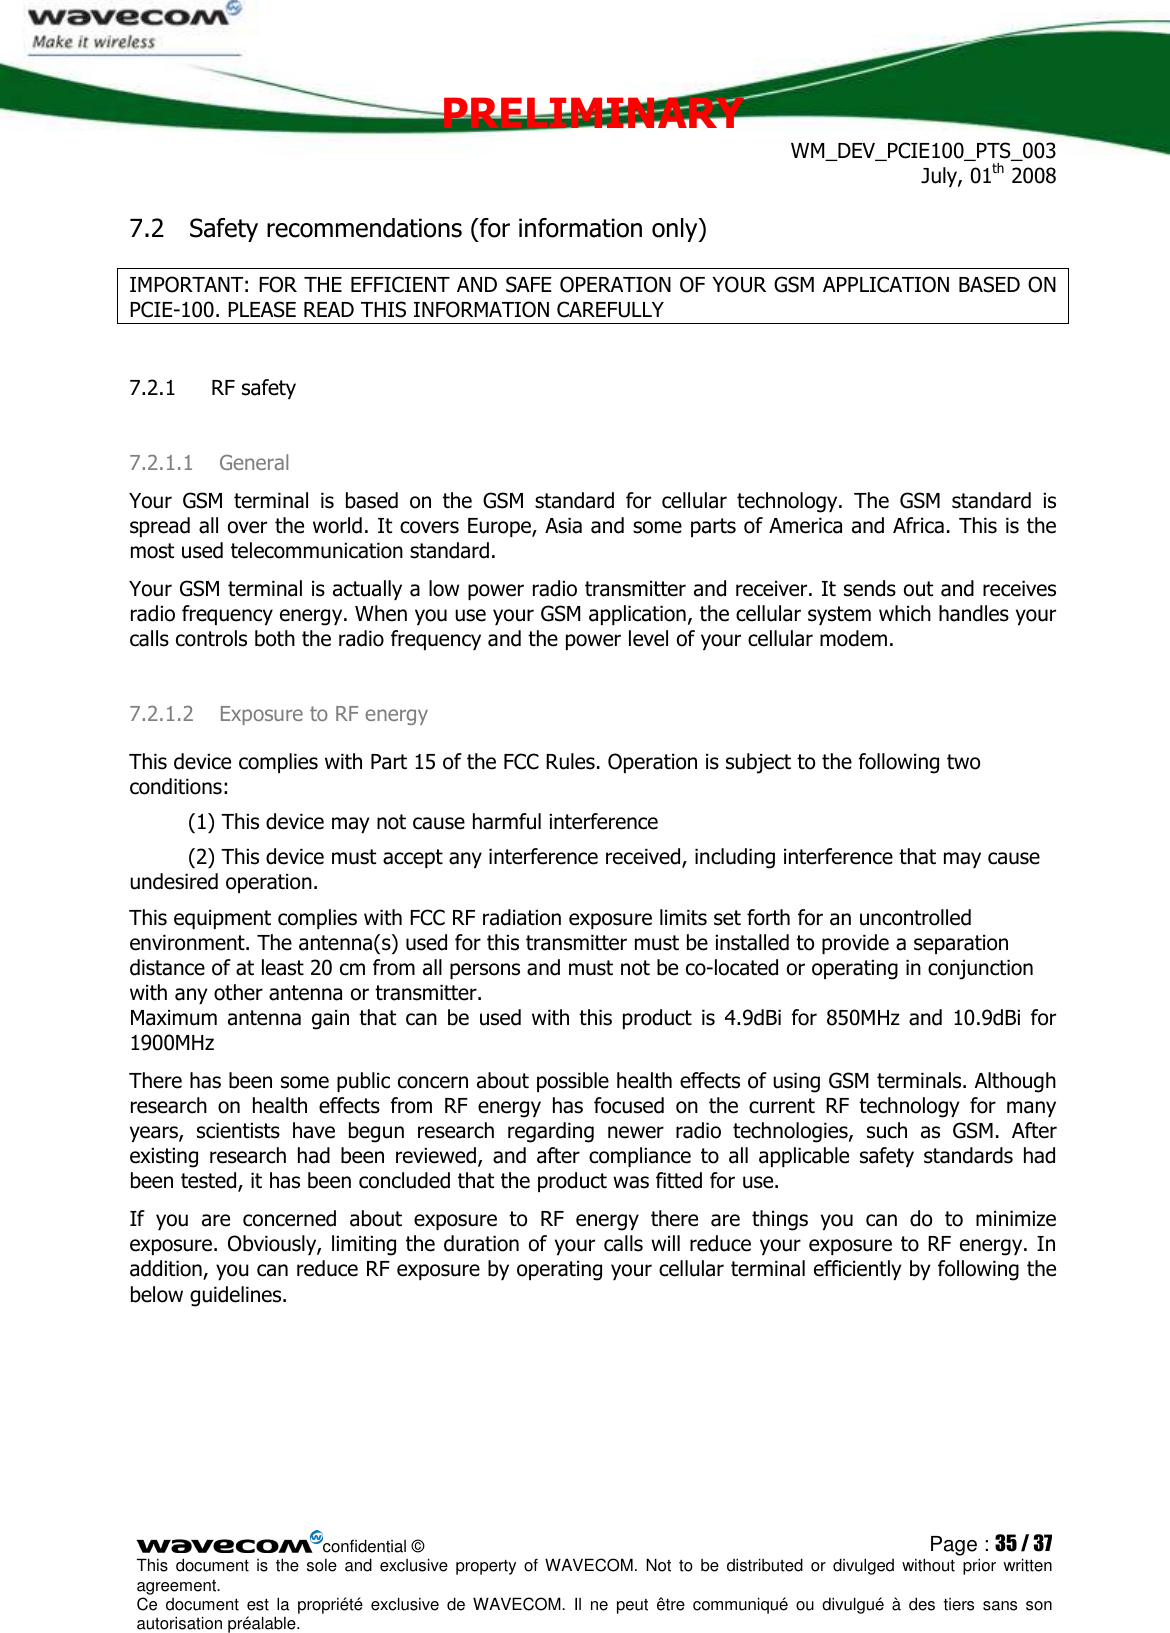 PRELIMINARY WM_DEV_PCIE100_PTS_003 July, 01th 2008  confidential © Page : 35 / 37 This  document  is  the  sole  and  exclusive property  of  WAVECOM.  Not  to  be  distributed  or  divulged  without  prior written agreement.  Ce  document  est  la  propriété  exclusive  de  WAVECOM.  Il  ne  peut  être  communiqué  ou  divulgué à  des  tiers  sans  son autorisation préalable.  7.2 Safety recommendations (for information only) IMPORTANT: FOR THE EFFICIENT AND SAFE OPERATION OF YOUR GSM APPLICATION BASED ON PCIE-100. PLEASE READ THIS INFORMATION CAREFULLY 7.2.1  RF safety 7.2.1.1 General Your  GSM  terminal  is  based  on  the  GSM  standard  for  cellular  technology.  The  GSM  standard  is spread all over the world. It covers Europe, Asia and some parts of America and Africa. This is the most used telecommunication standard. Your GSM terminal is actually a low power radio transmitter and receiver. It sends out and receives radio frequency energy. When you use your GSM application, the cellular system which handles your calls controls both the radio frequency and the power level of your cellular modem. 7.2.1.2 Exposure to RF energy This device complies with Part 15 of the FCC Rules. Operation is subject to the following two conditions:           (1) This device may not cause harmful interference           (2) This device must accept any interference received, including interference that may cause undesired operation. This equipment complies with FCC RF radiation exposure limits set forth for an uncontrolled environment. The antenna(s) used for this transmitter must be installed to provide a separation distance of at least 20 cm from all persons and must not be co-located or operating in conjunction with any other antenna or transmitter. Maximum  antenna  gain  that  can  be  used  with  this  product  is  4.9dBi  for  850MHz  and  10.9dBi  for 1900MHz There has been some public concern about possible health effects of using GSM terminals. Although research  on  health  effects  from  RF  energy  has  focused  on  the  current  RF  technology  for  many years,  scientists  have  begun  research  regarding  newer  radio  technologies,  such  as  GSM.  After existing  research  had  been  reviewed,  and  after  compliance  to  all  applicable  safety  standards  had been tested, it has been concluded that the product was fitted for use. If  you  are  concerned  about  exposure  to  RF  energy  there  are  things  you  can  do  to  minimize exposure. Obviously, limiting the duration of your calls will reduce your exposure to RF energy. In addition, you can reduce RF exposure by operating your cellular terminal efficiently by following the below guidelines.        